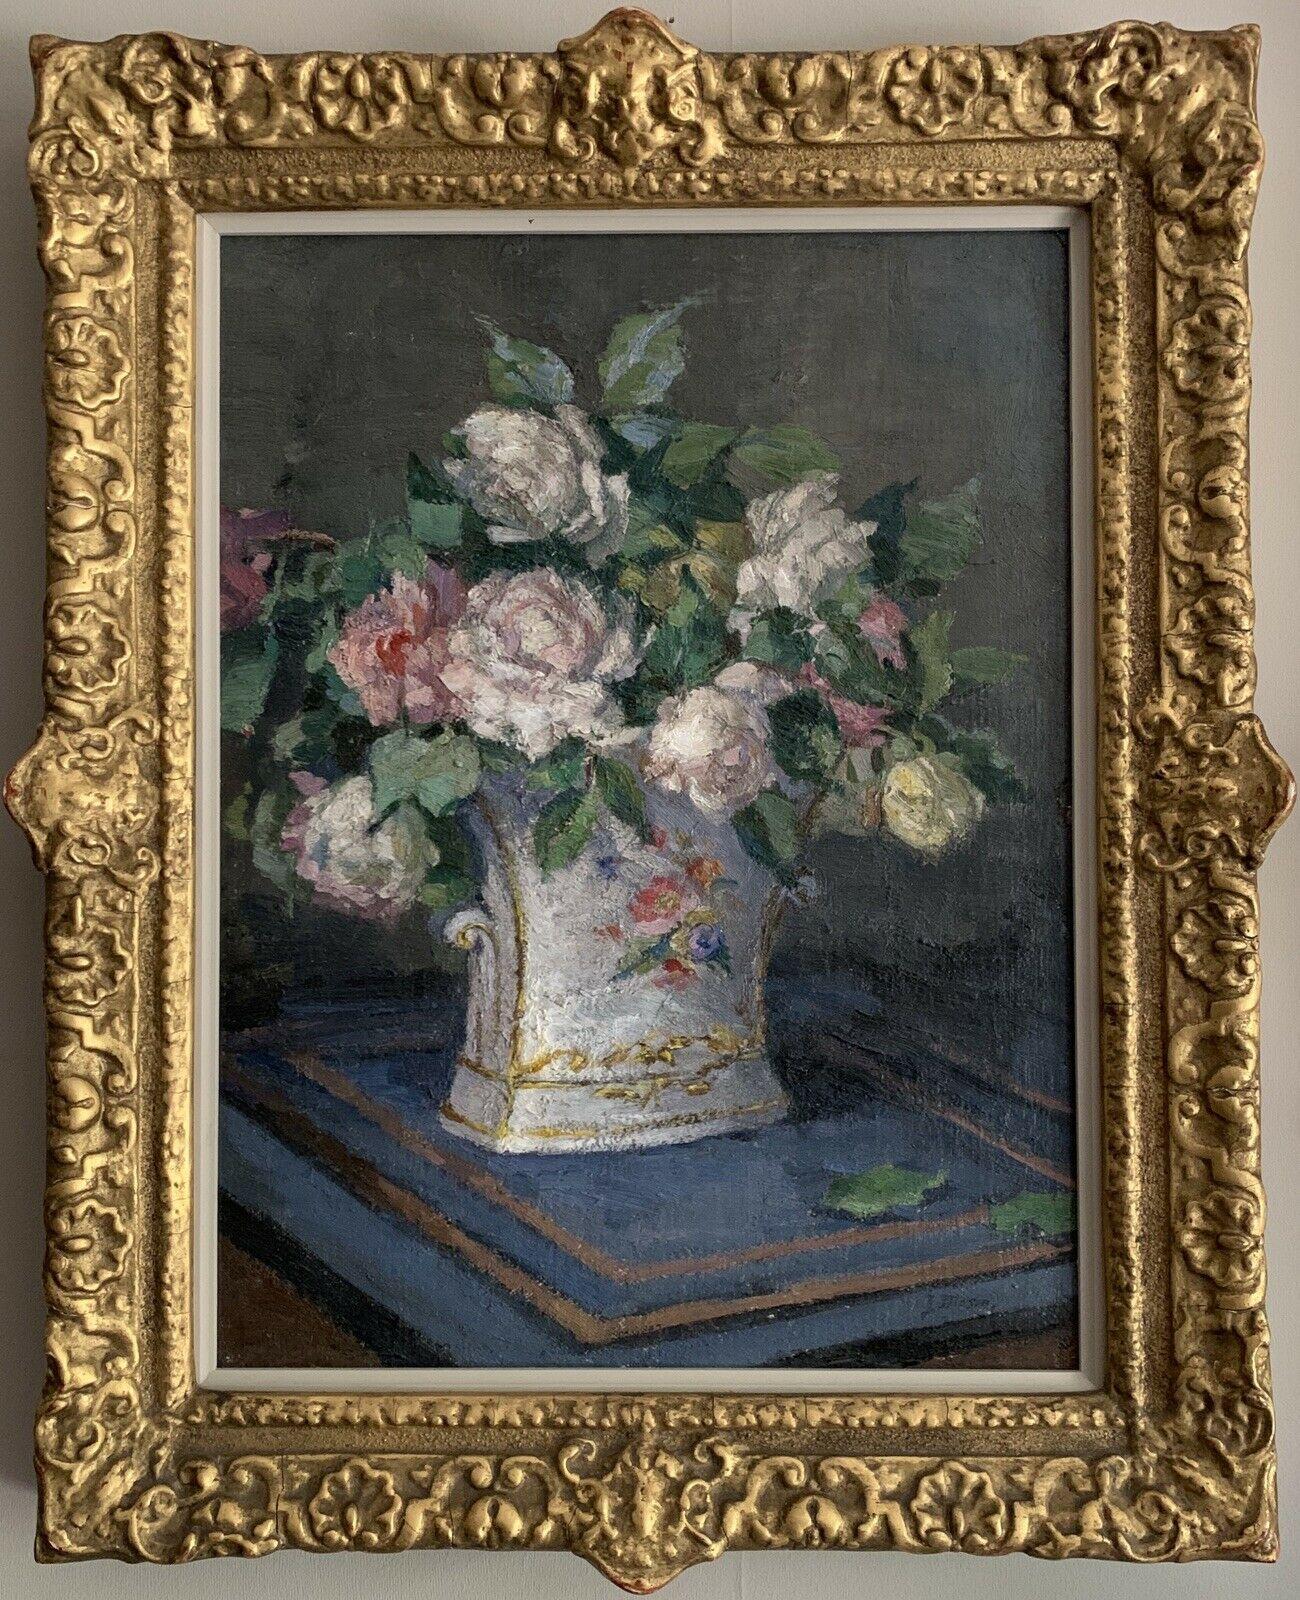 J. MASON Still-Life Painting - EARLY 1900'S ENGLISH IMPRESSIONIST SIGNED OIL - STILL LIFE ROSES IN ORNATE VASE